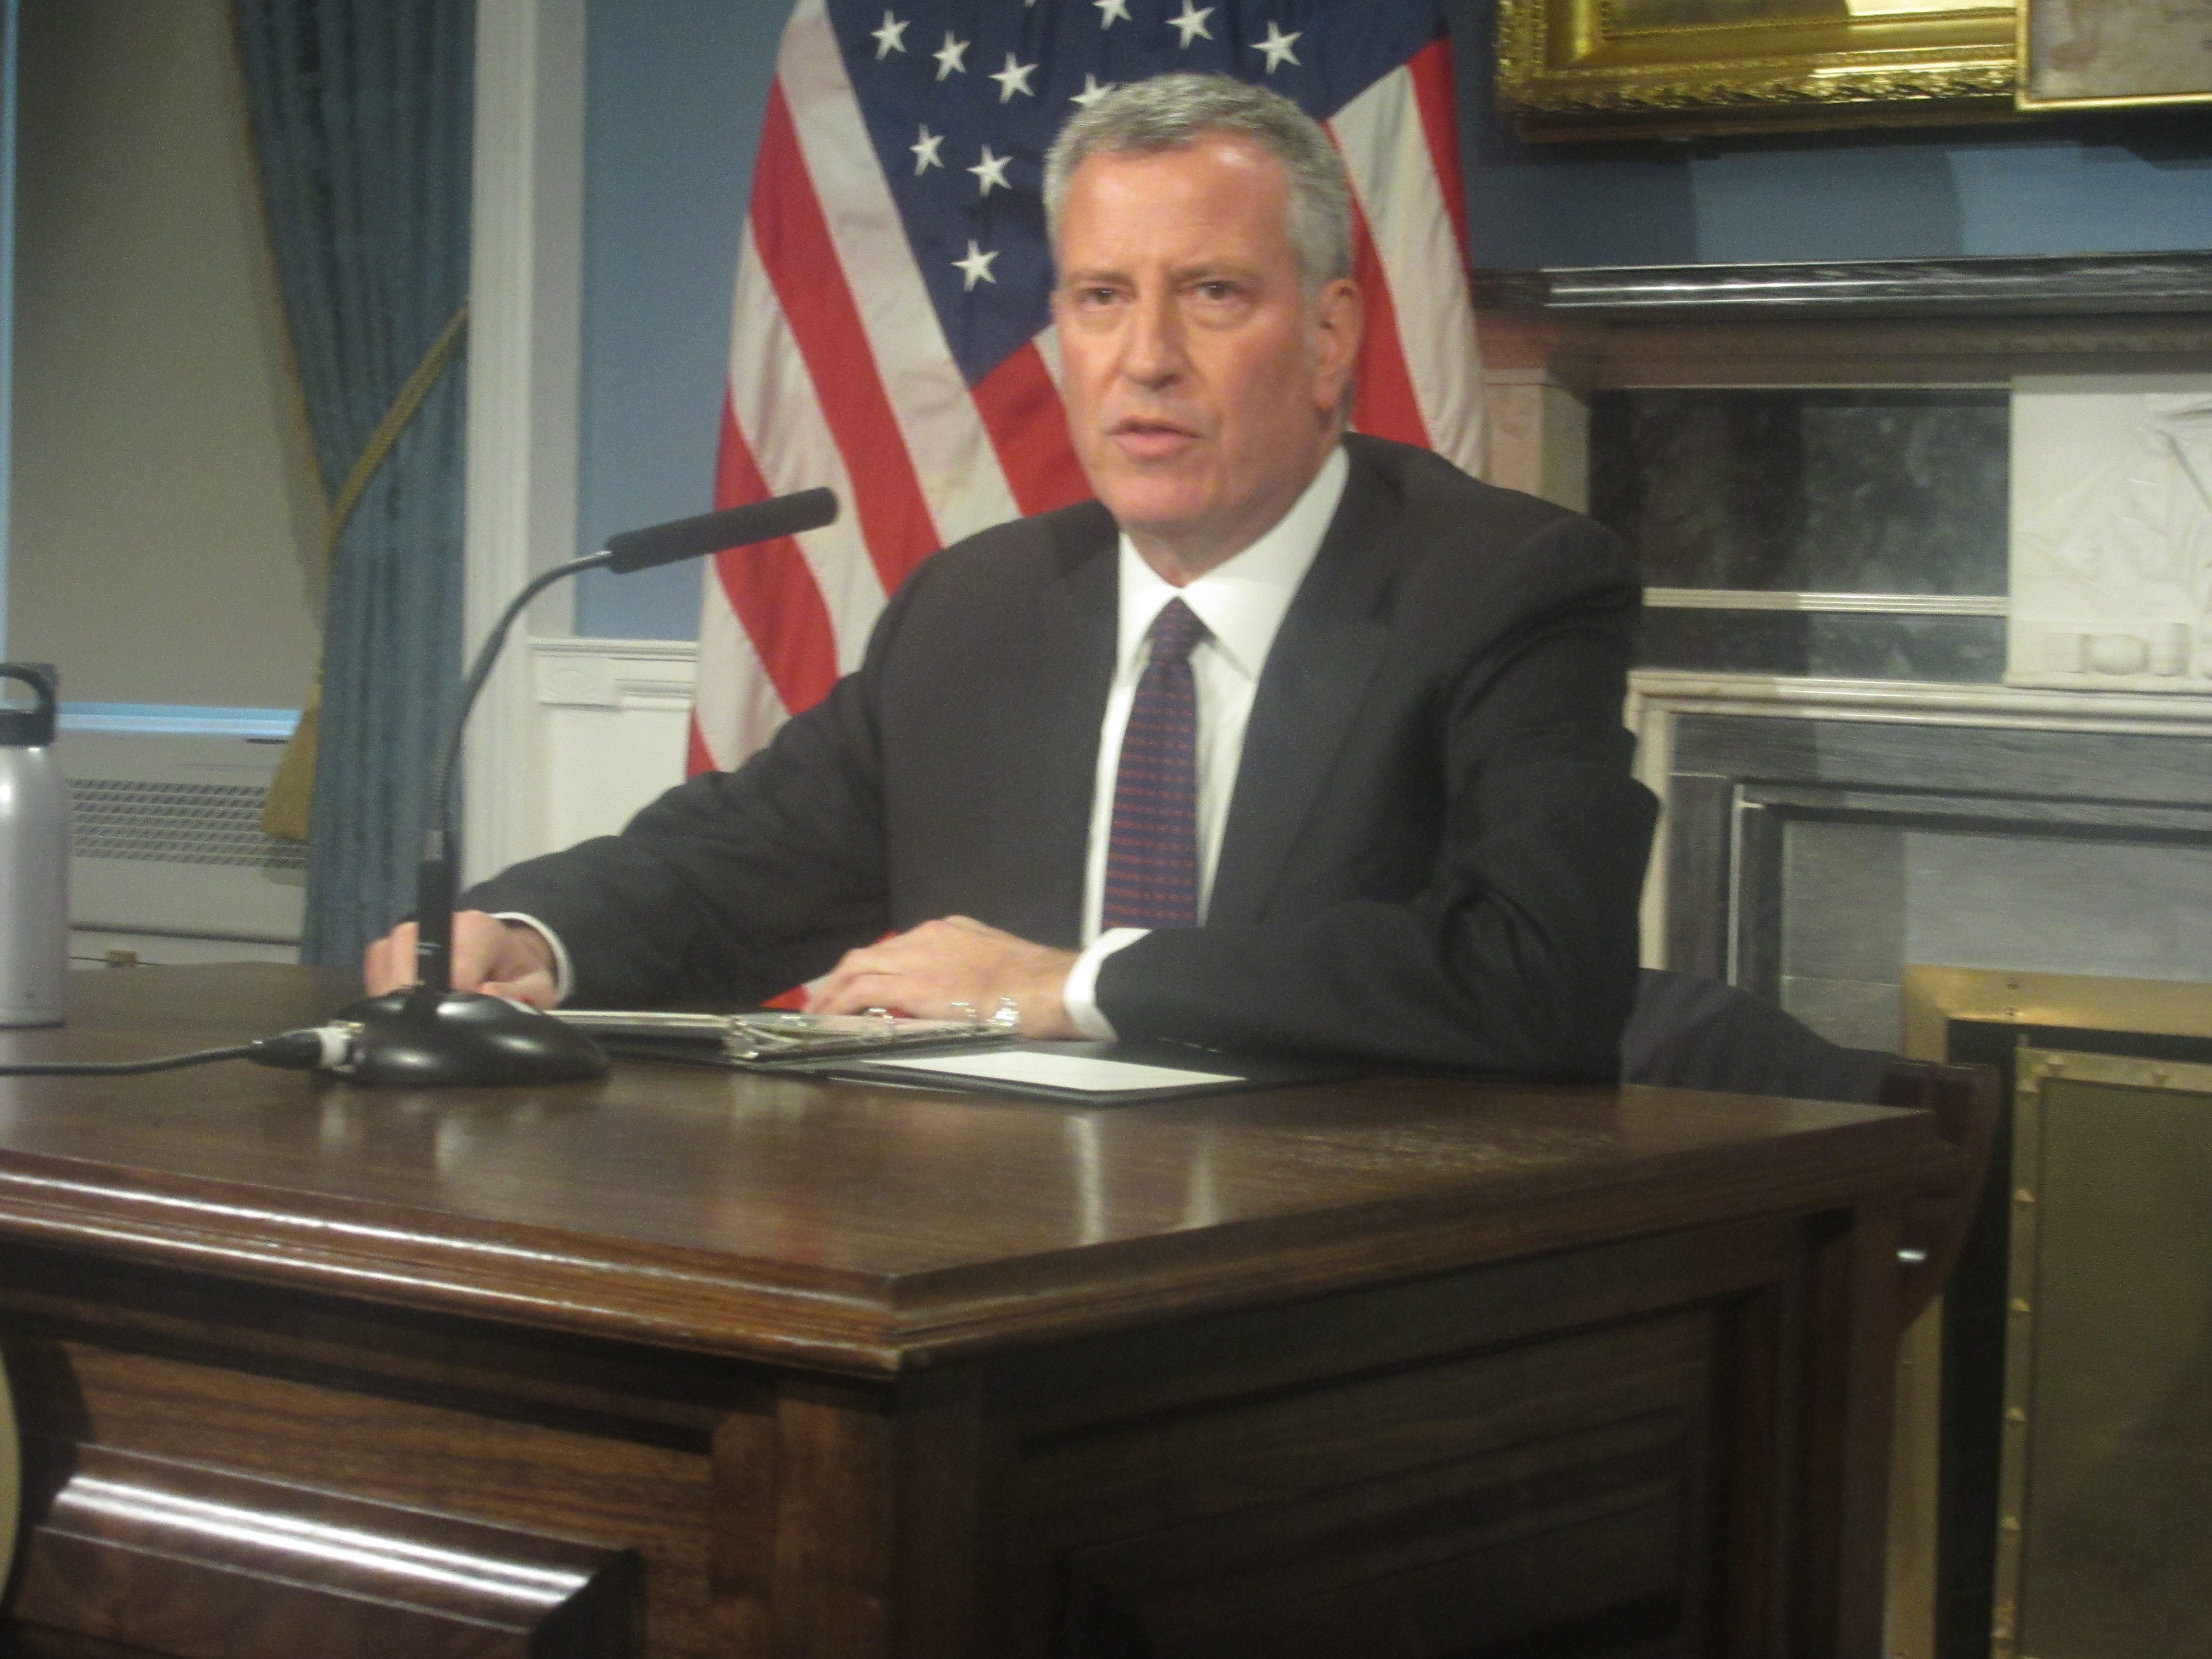 Mayor Bill de Blasio addresses the aftermath of Donald Trump winning the presidential election in City Hall's Blue Room. 